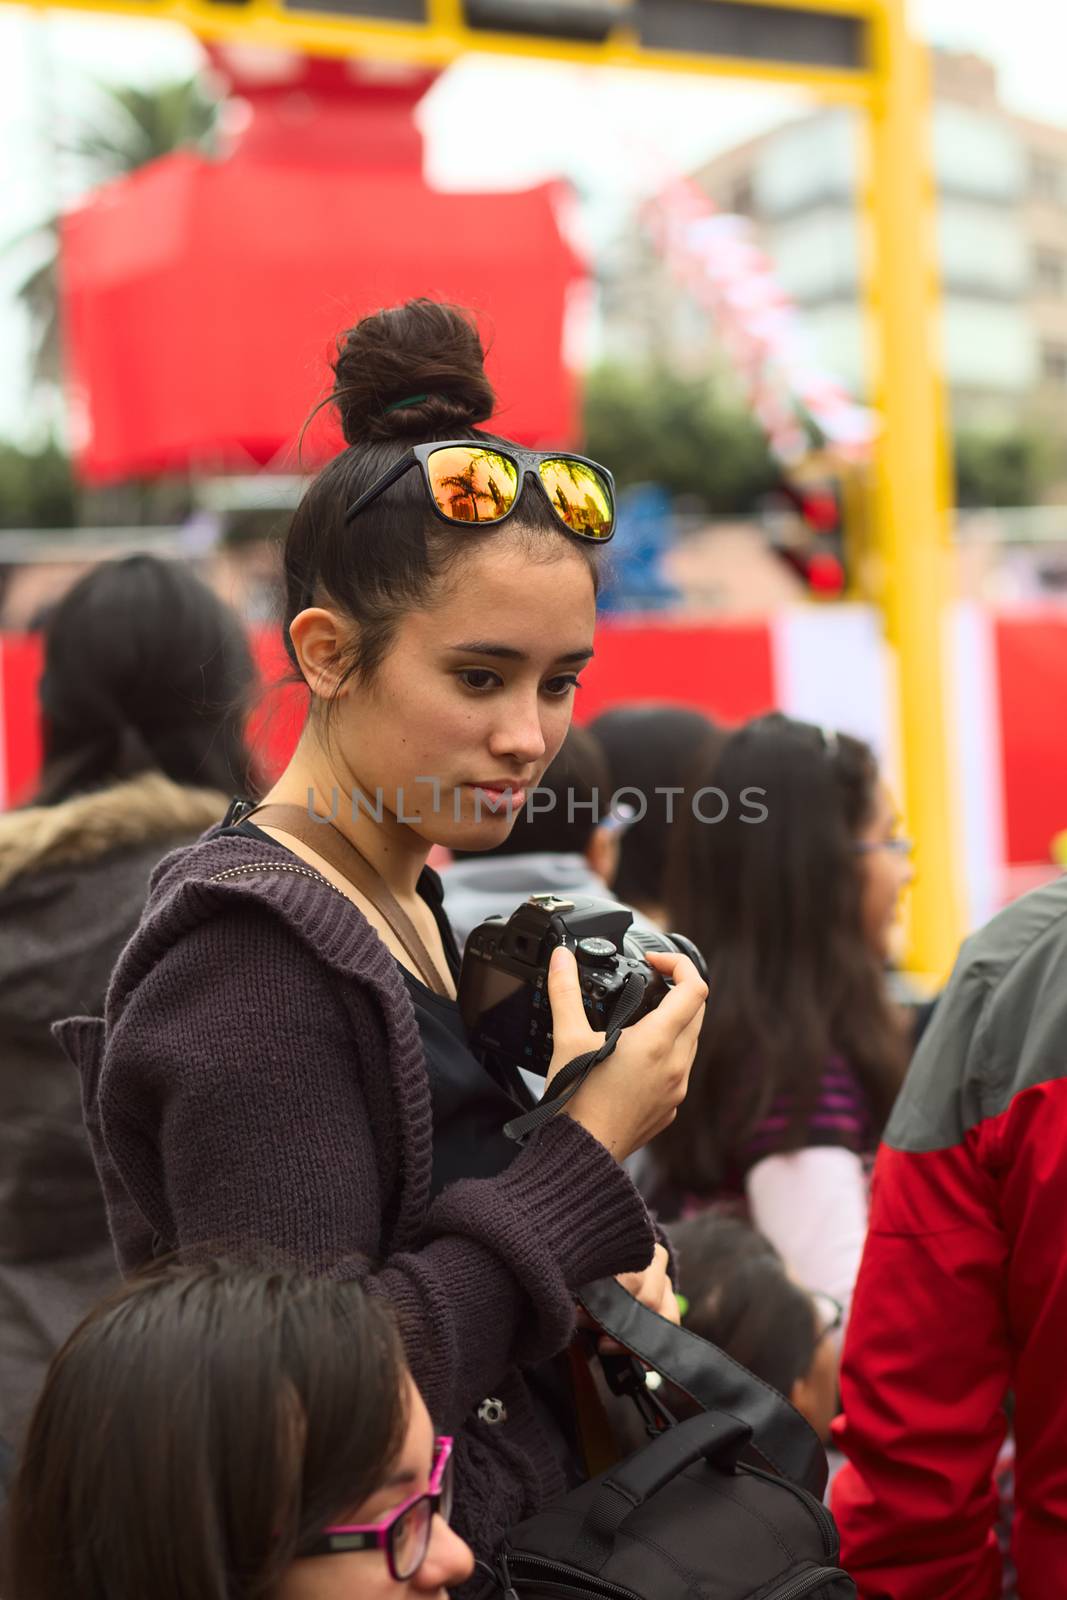 LIMA, PERU - JULY 21, 2013: Unidentified young woman with camera on the Wong Parade in Miraflores on July 21, 2013 in Lima, Peru. The Parade (Gran Corso de Wong) is a traditional parade to celebrate the Peruvian national holiday which is on July 28-29.